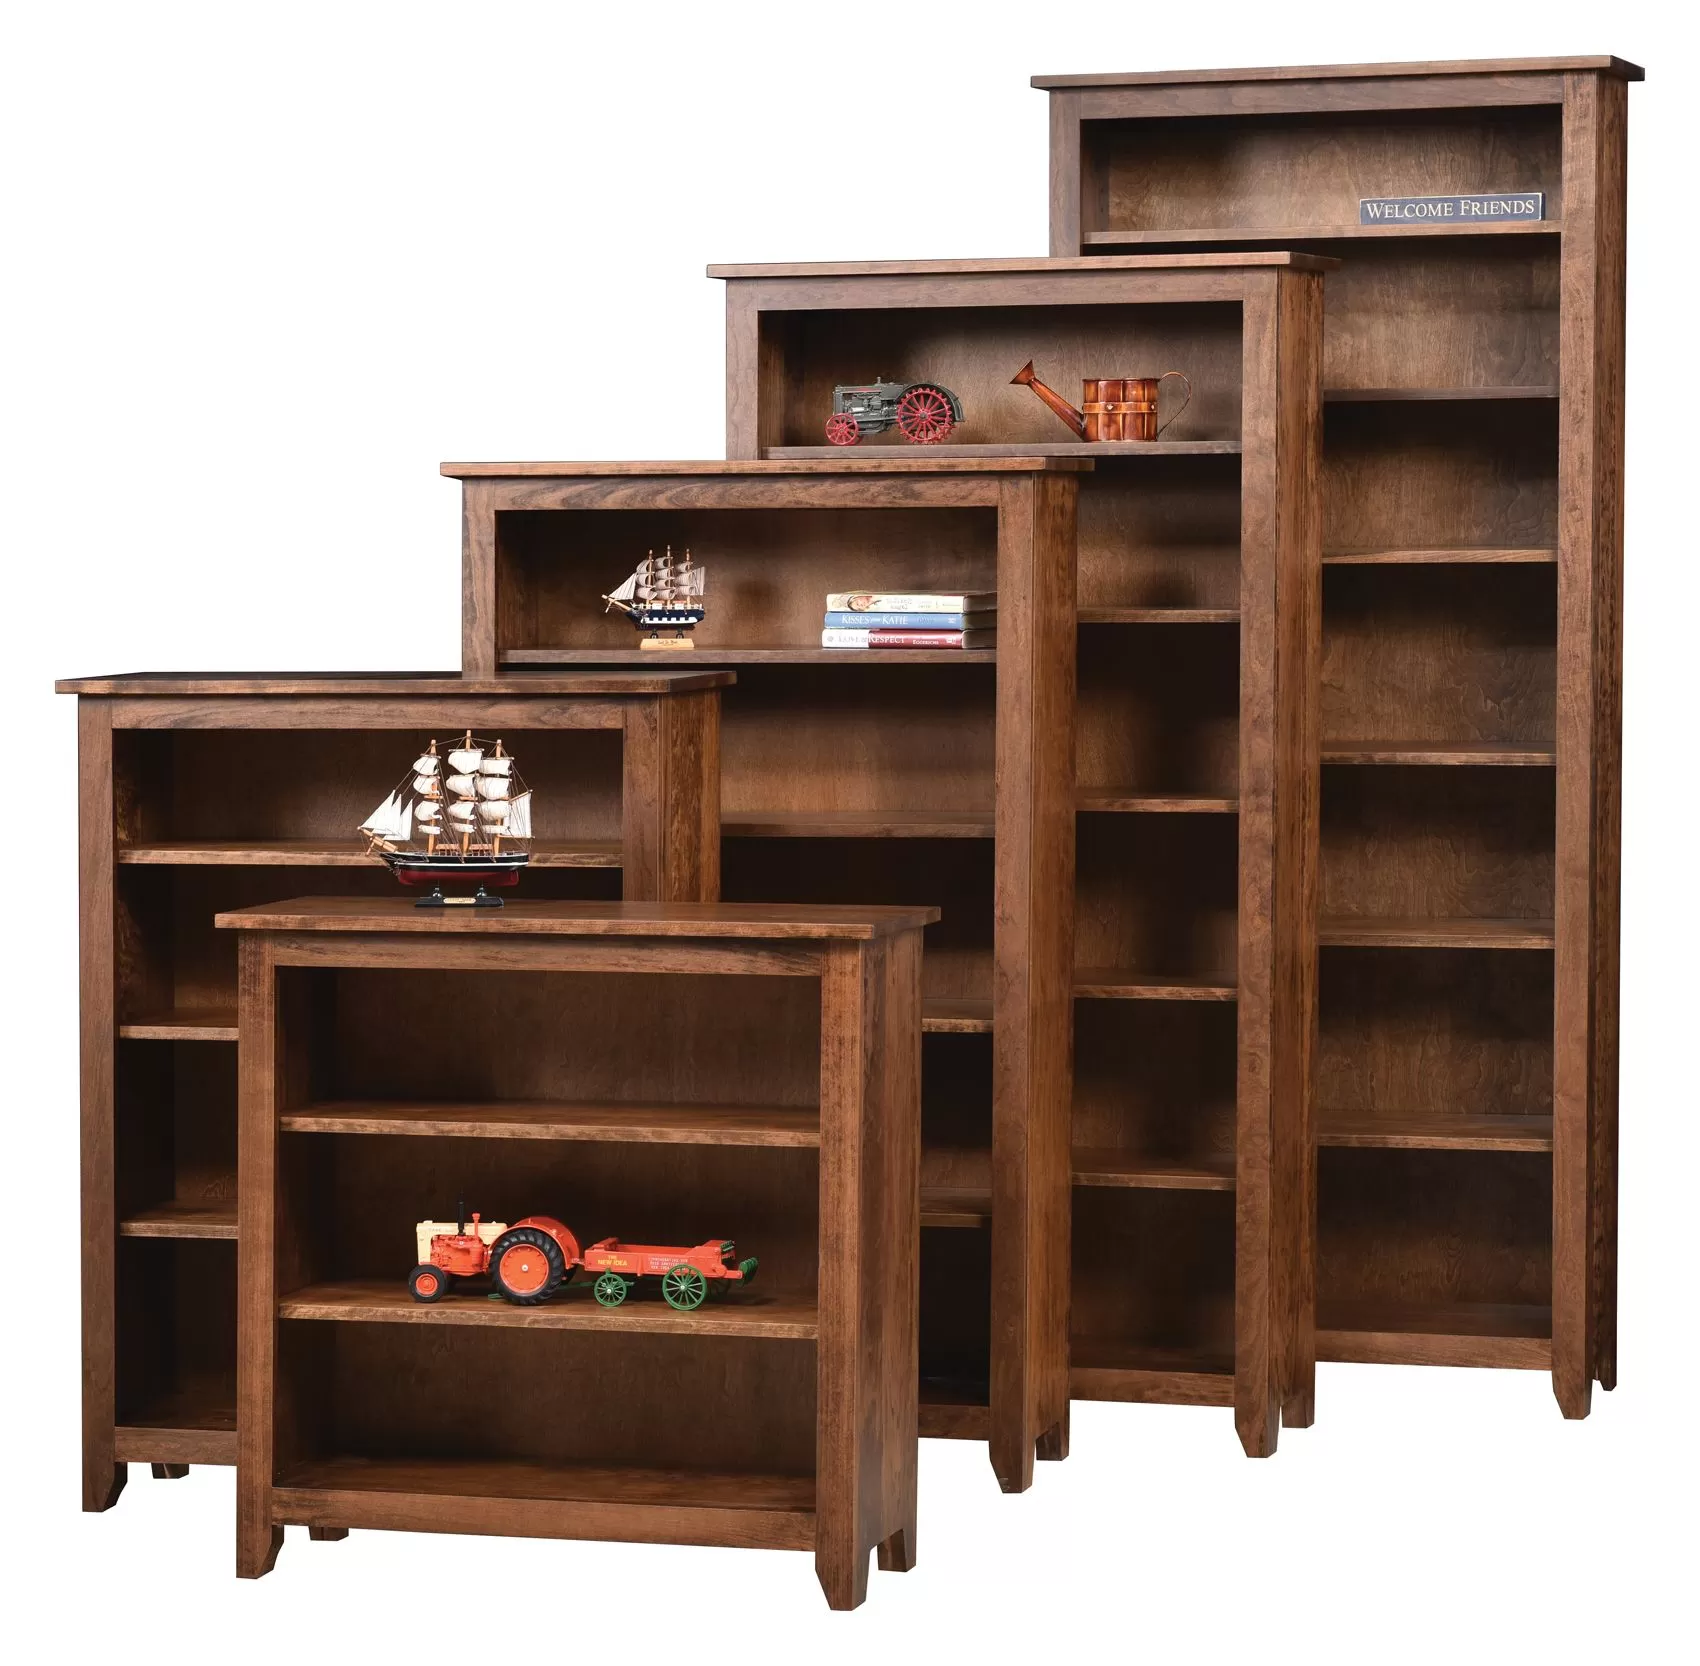 36" Modern Mission Open Bookcases